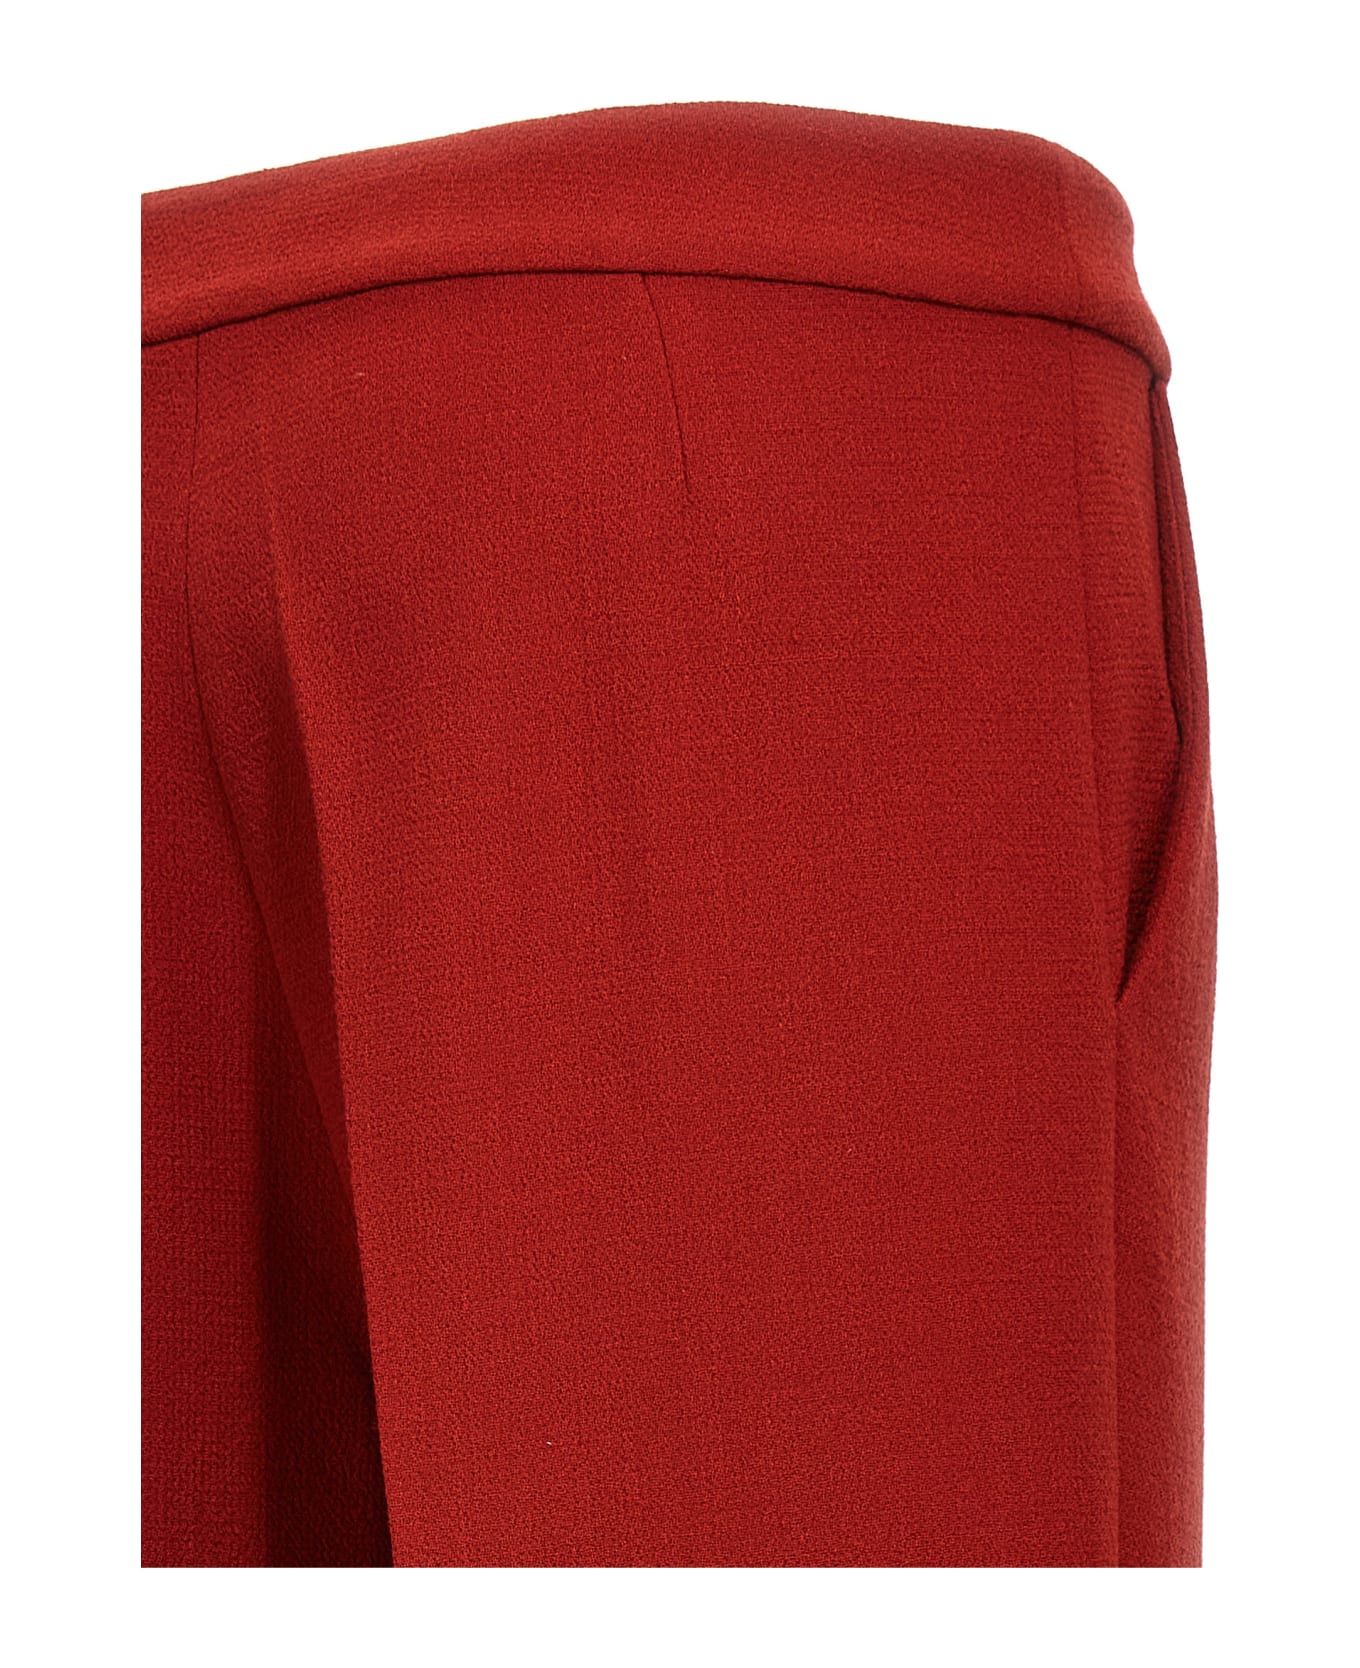 Gianluca Capannolo 'valerie' Pants - Red ボトムス